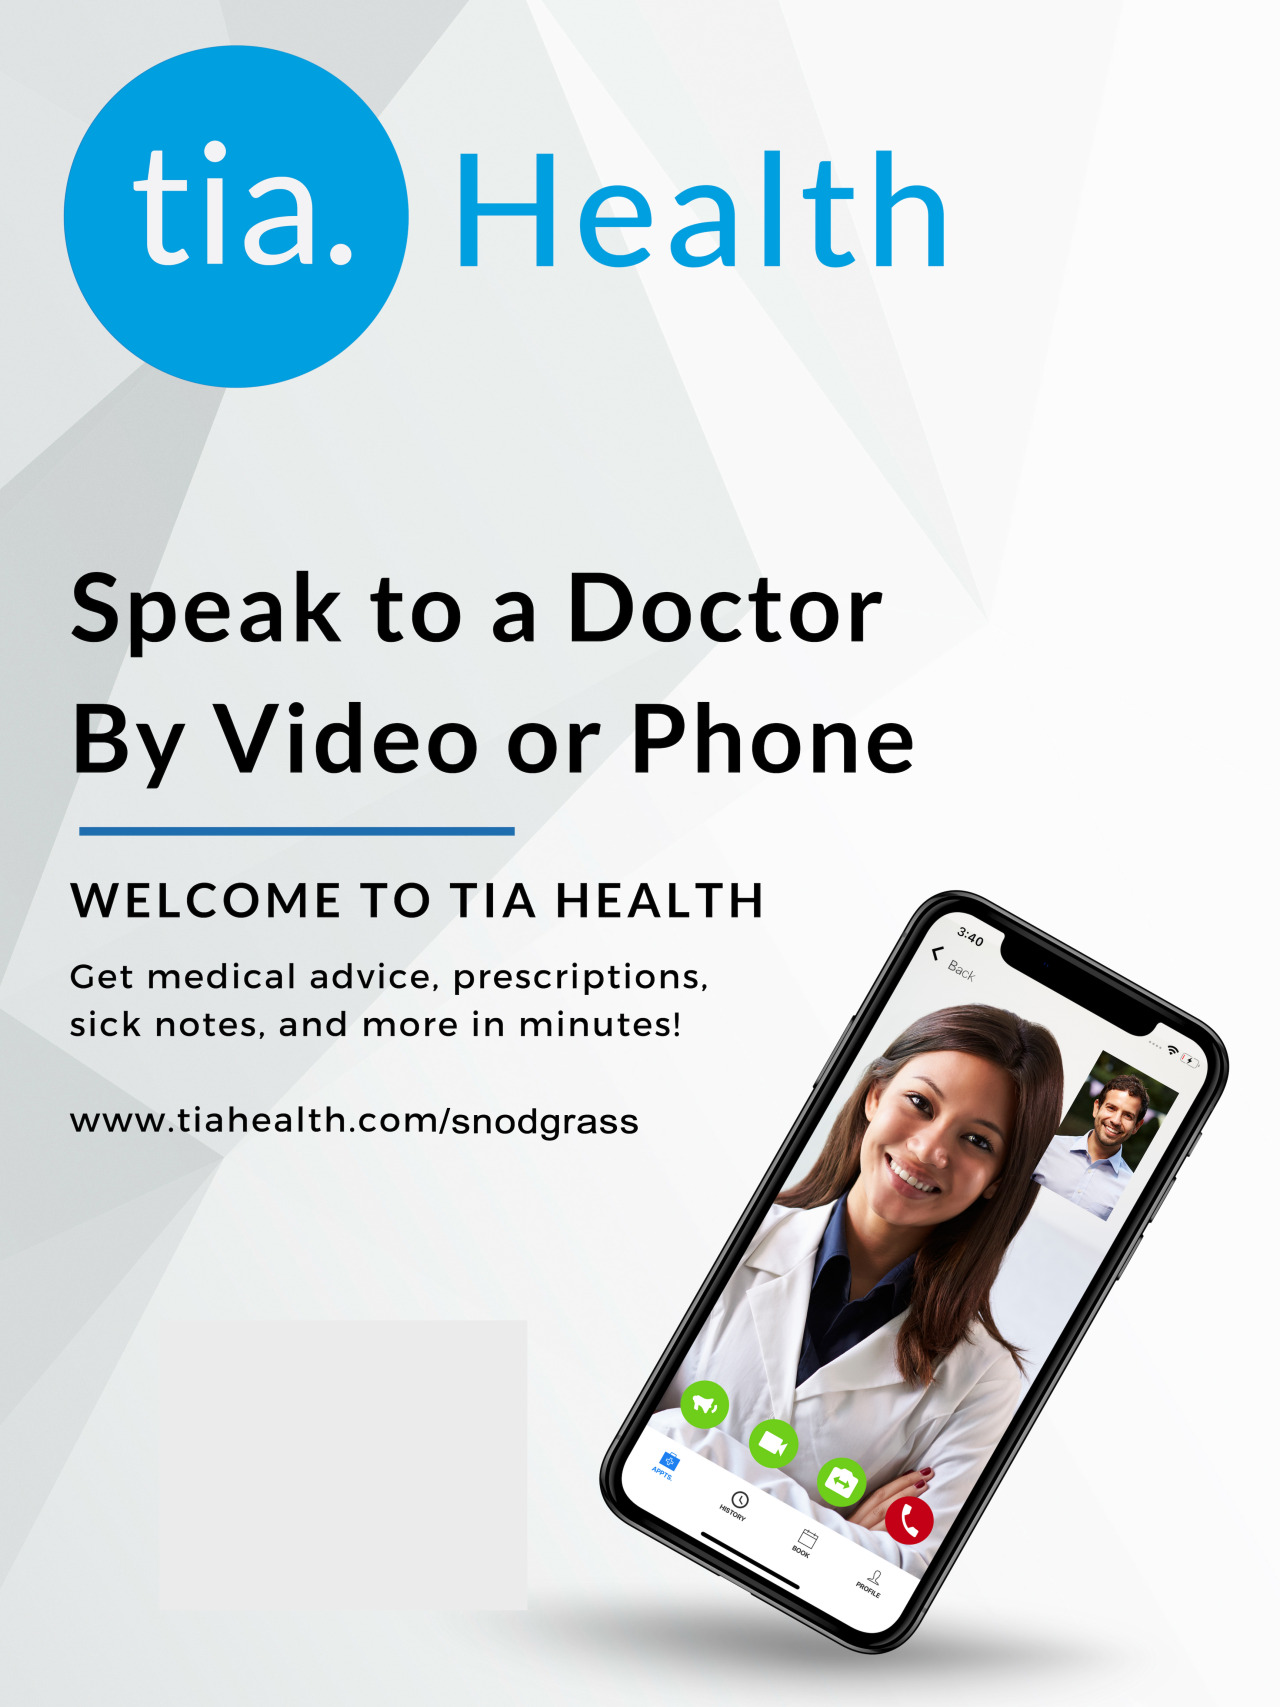 <p>Many Canadians have been looking for alternatives to healthcare as some of
our doctor’s offices are closed or they are only taking urgent/high priority
cases.  There is an alternative.</p><p>Snodgrass Group Insurance is pleased to announce a new partnership with TIA
Health to provide virtual care for our clients, family and friends.  In a few simple steps you can be connected
with a doctor virtually to help with any medical issue.  What we enjoy about TIA Health is that for
residents of Ontario, Alberta, and British Columbia you can receive free access
to virtual healthcare with a valid health card. 
For those who live in other provinces, TIA Health offers the lowest
pricing across Canada.</p><p>To learn more visit <a href="https://www.snodgrassgroupinsurance.ca/Tele-Medicine.php">https://www.snodgrassgroupinsurance.ca/Tele-Medicine.php</a></p><p>Take care and stay safe.</p>